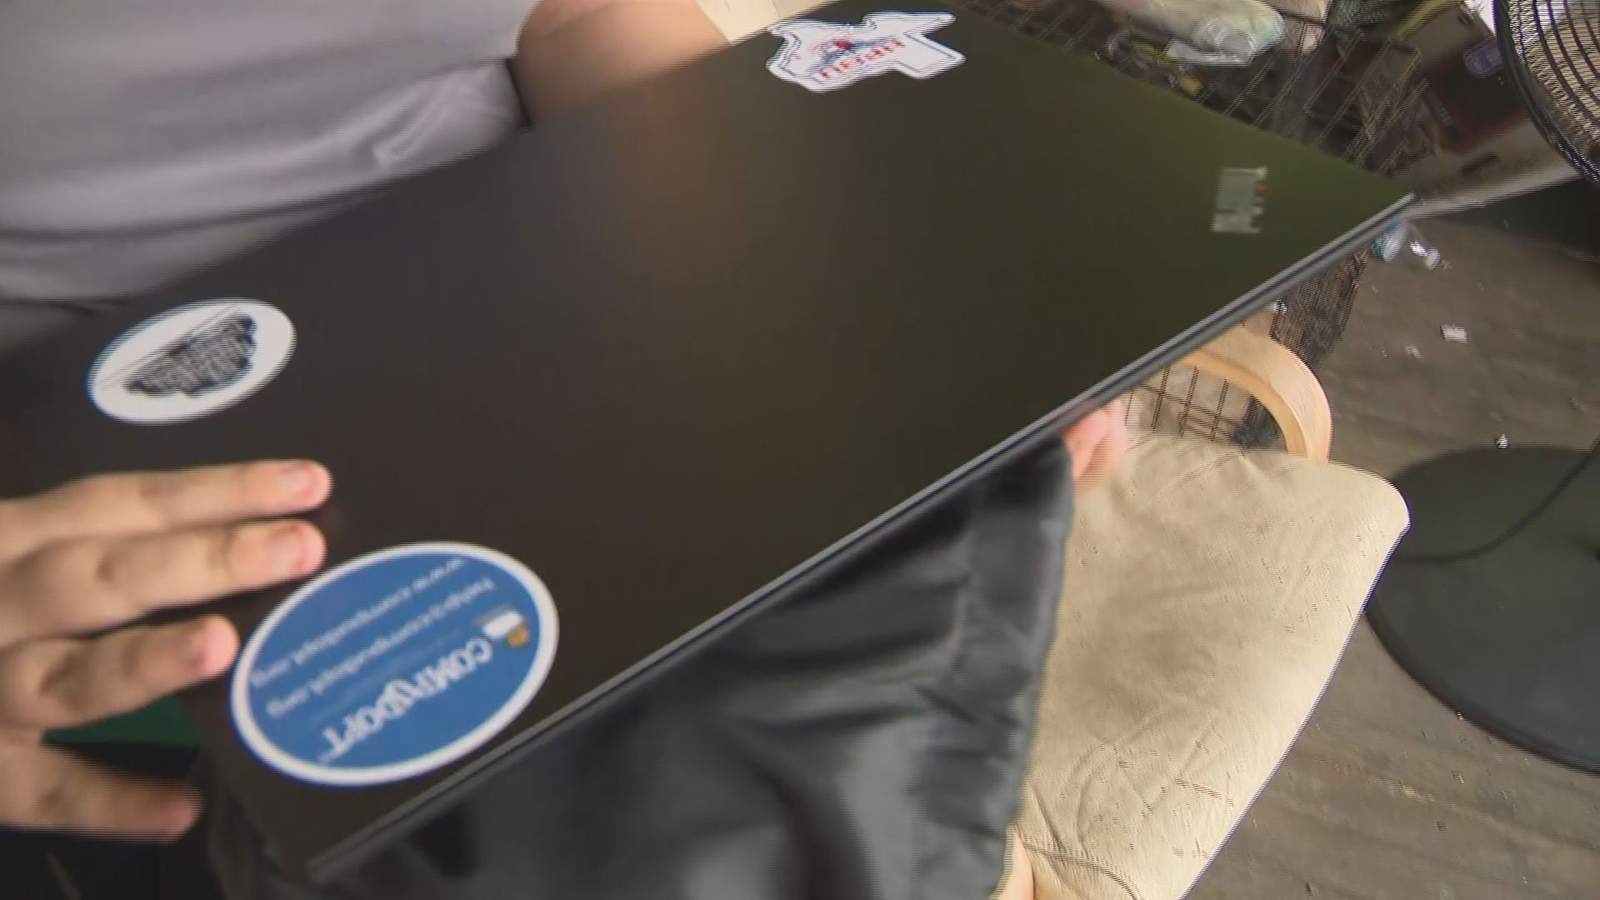 155 refurbished laptop, desktop computers given to Navarro Middle School students in need